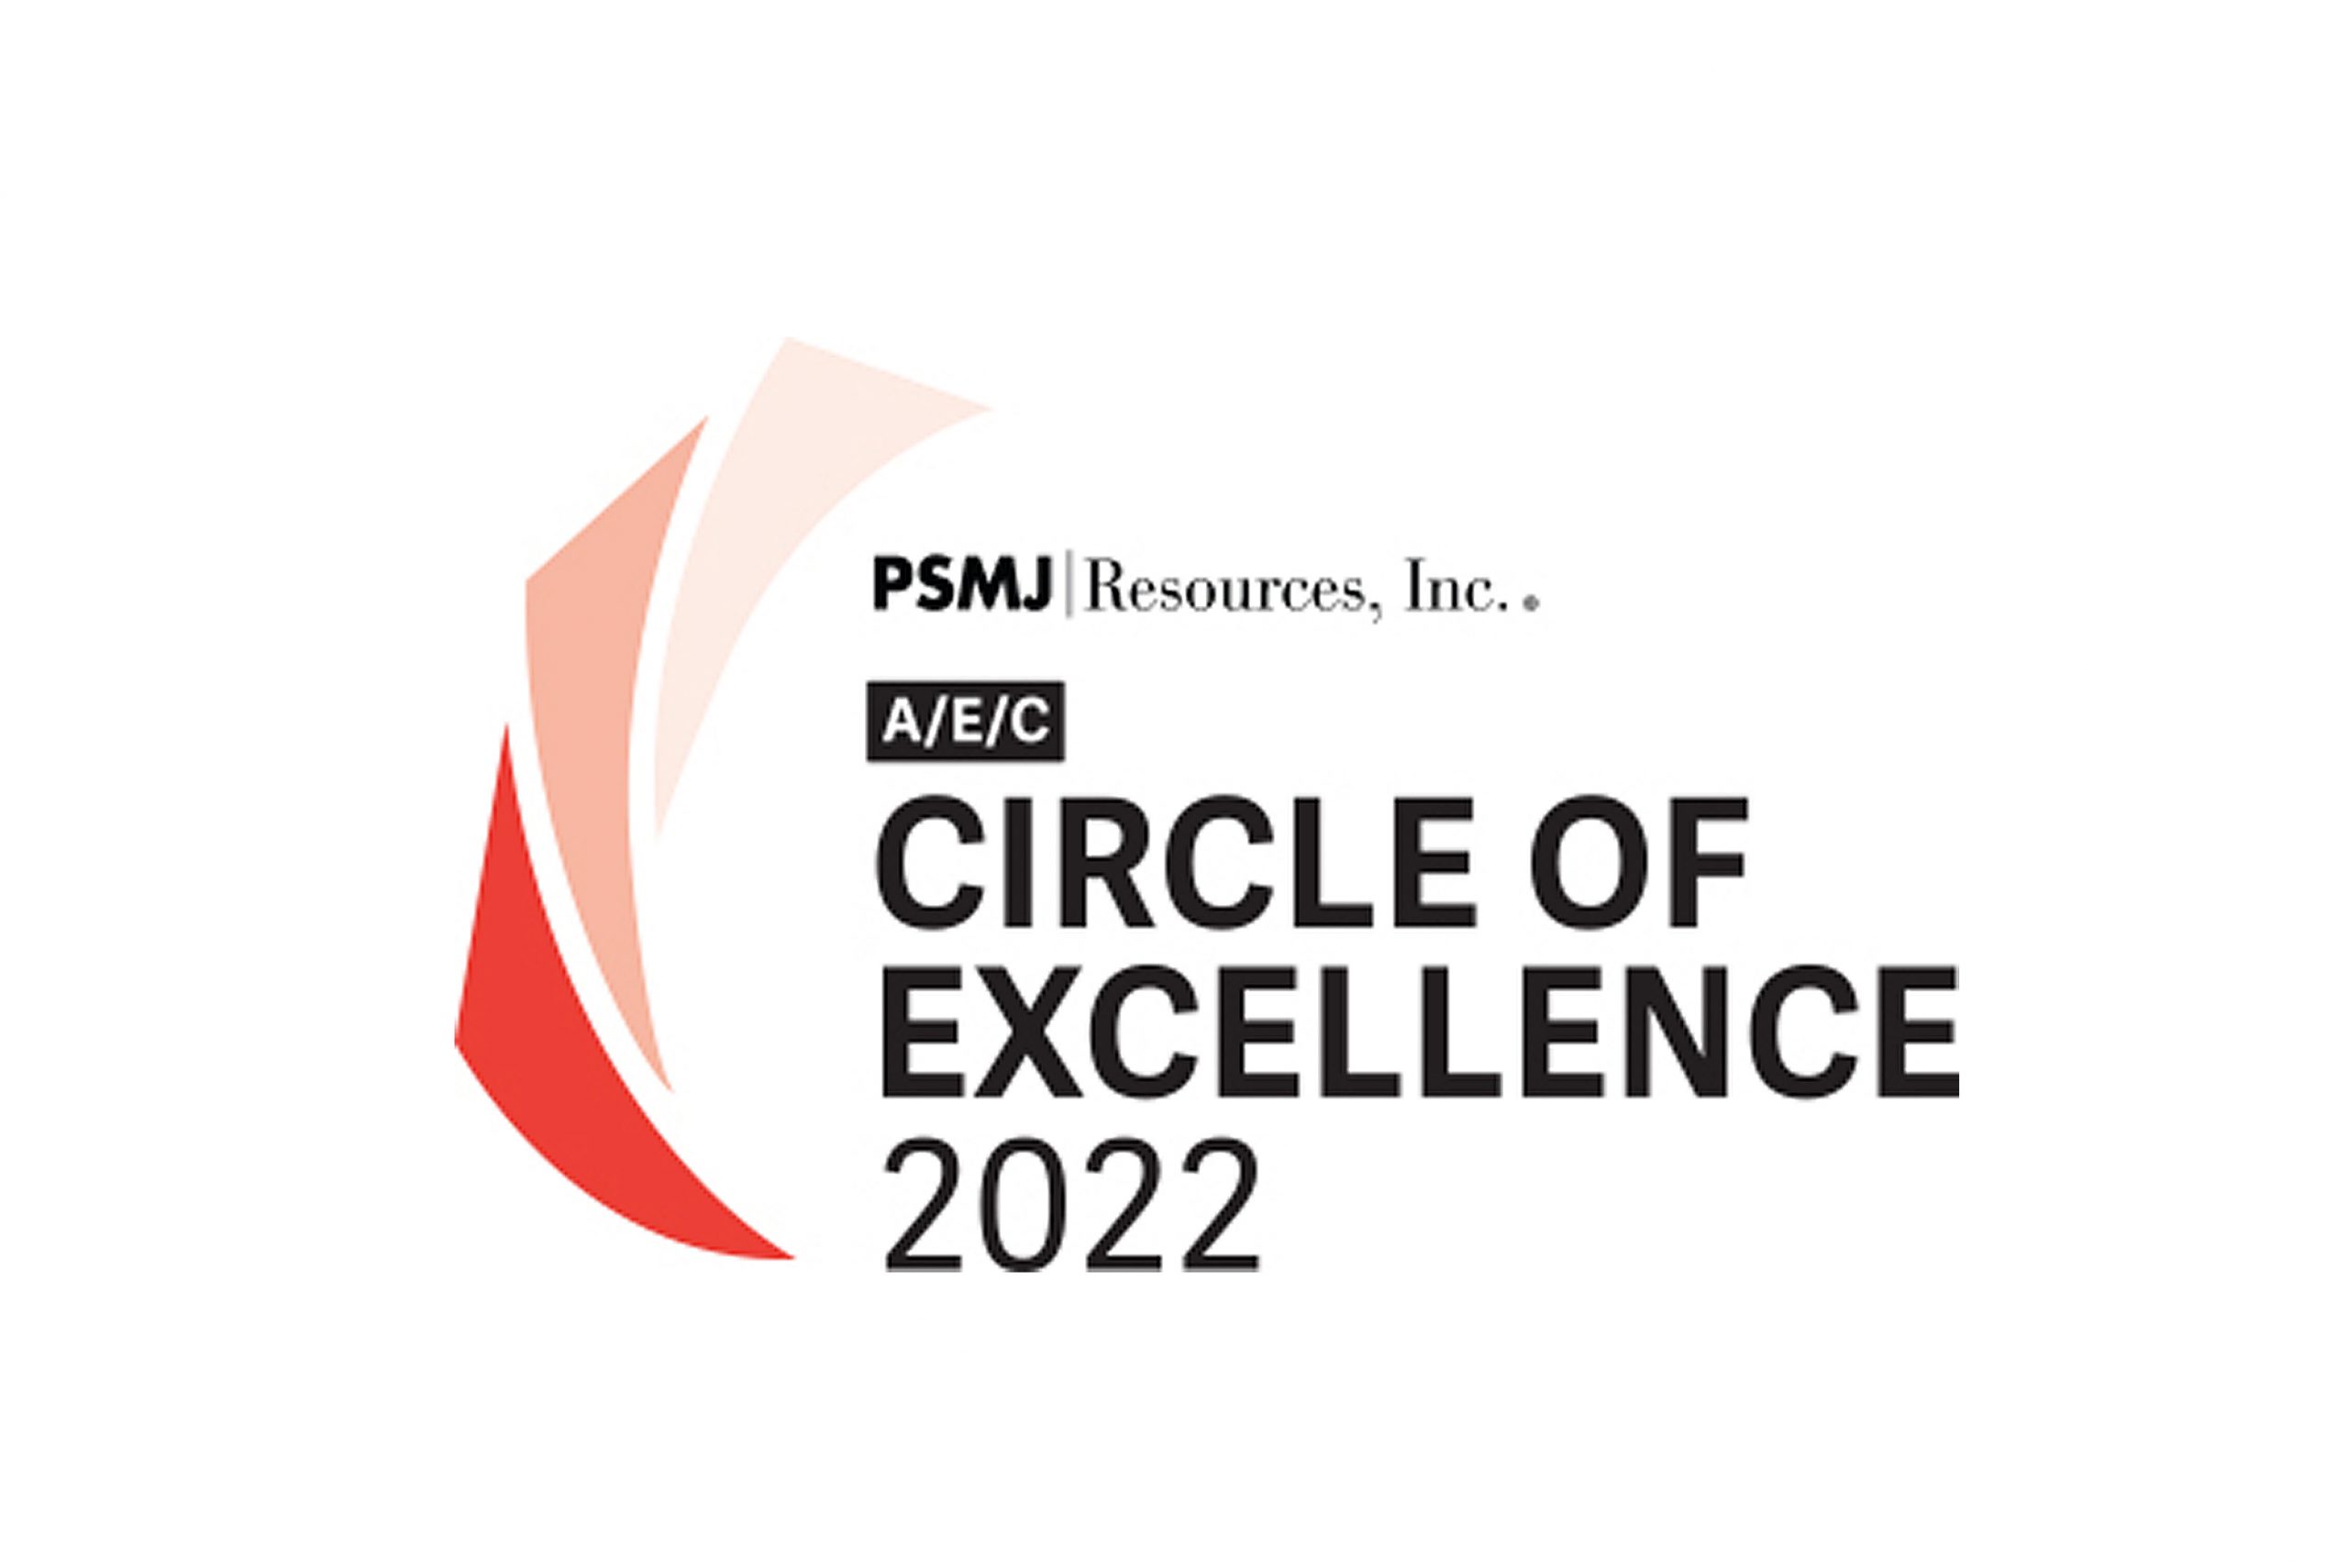 BC&A was awarded the 2022 Circle of Excellence Award! Bowen Collins